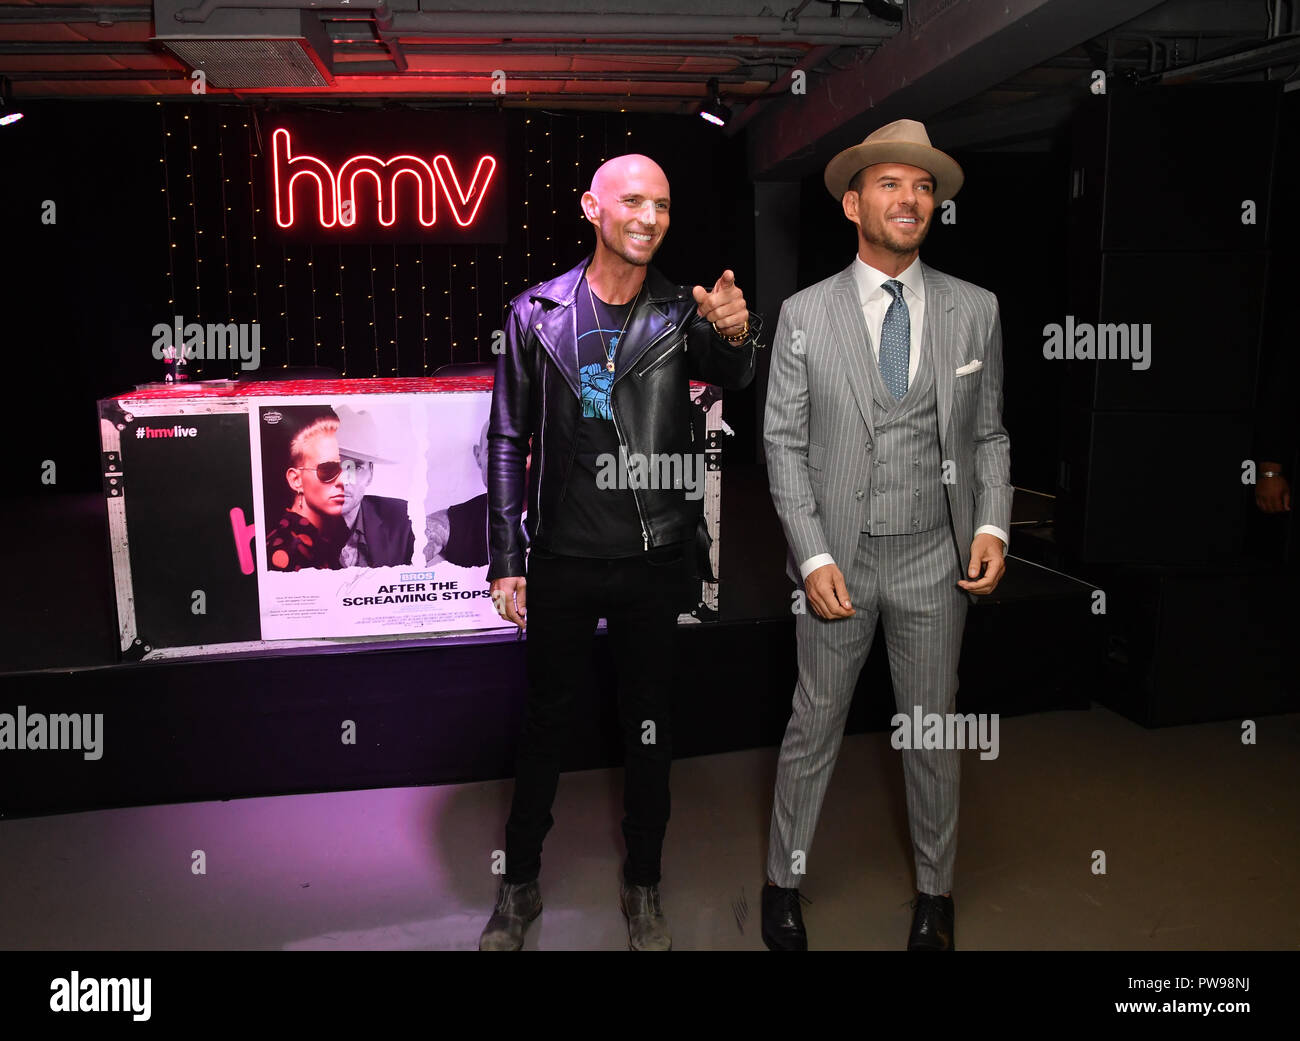 London, UK. 14 October 2018. Iconic 80’s band Bros celebrating the DVD release of their documentary ‘Bros: After The Screaming Stops’ with an exclusive signing event held at hmv’s flagship 363 Oxford Street store this coming Sunday 14th October 2018. Credit: Picture Capital/Alamy Live News Stock Photo